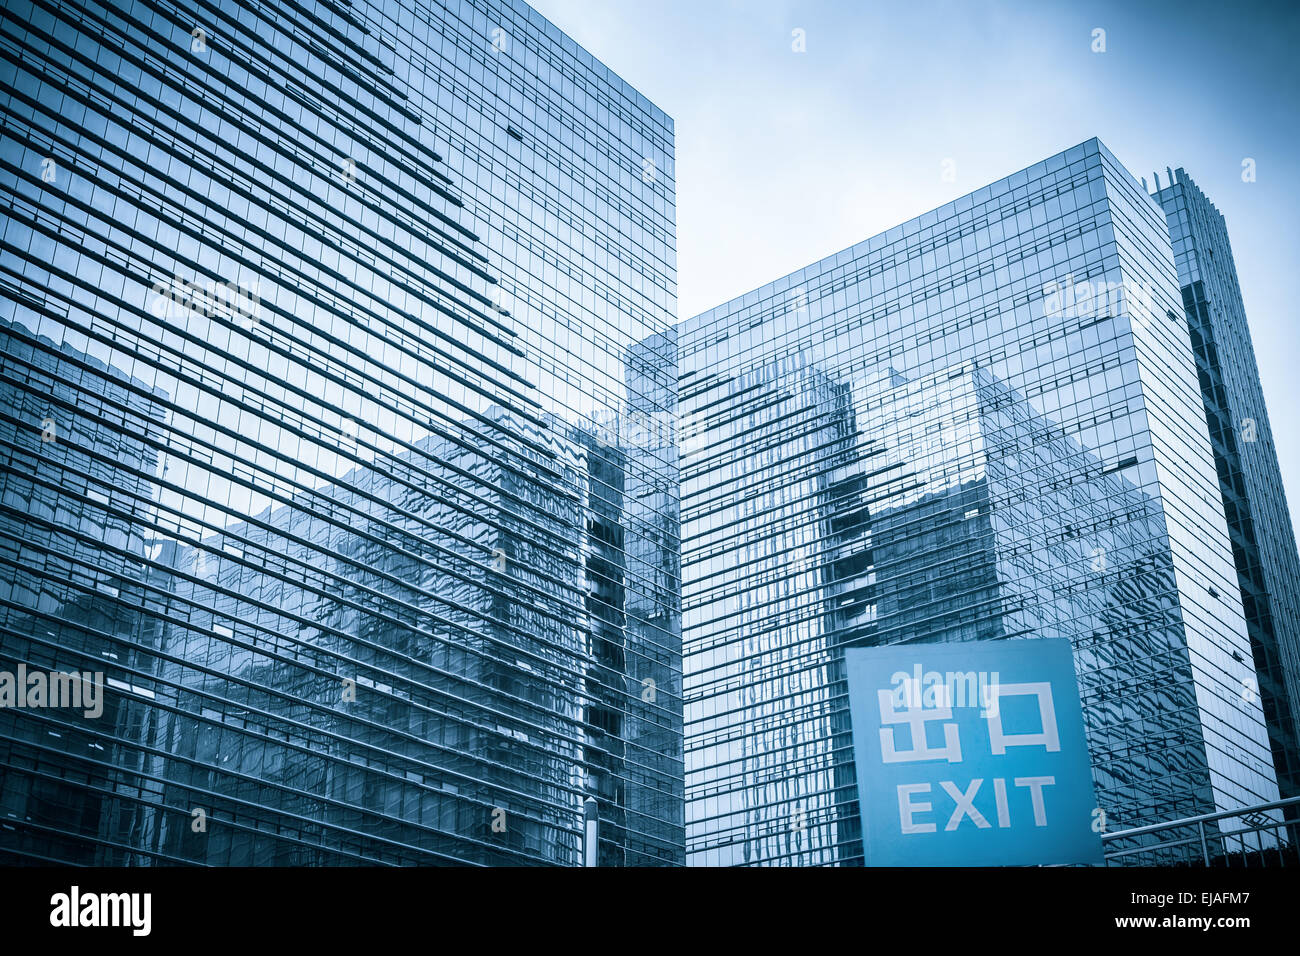 modern glass skyscraper with garage exit traffic sign Stock Photo